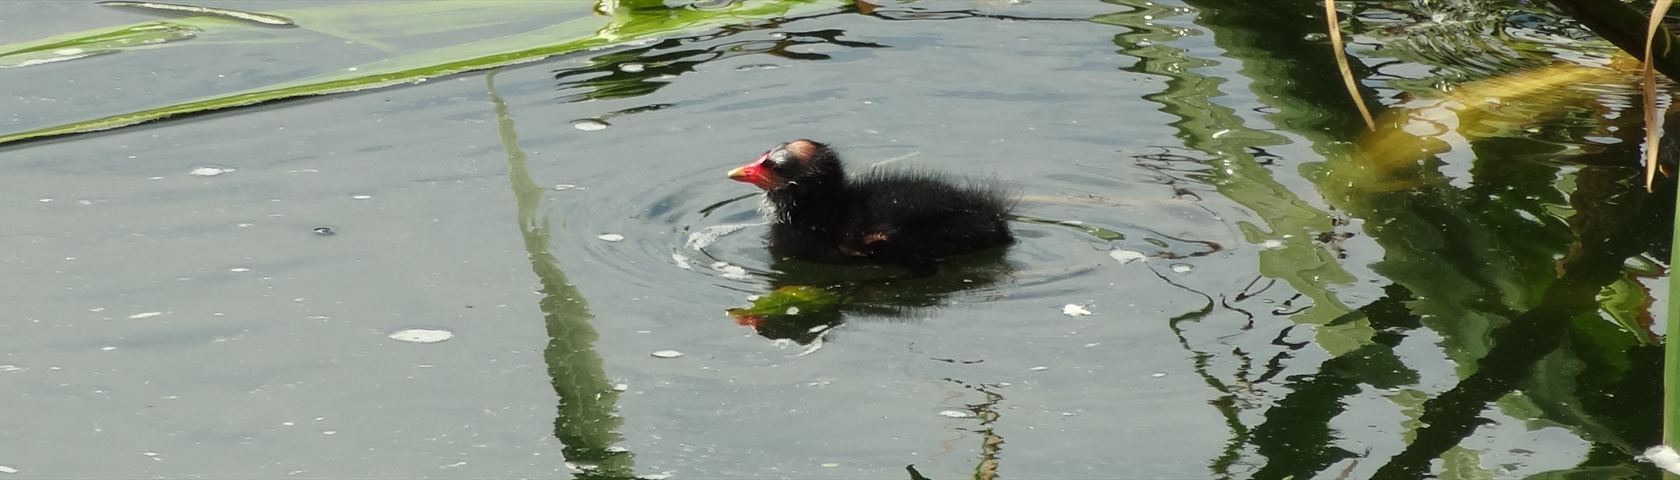 Duckling Swimming